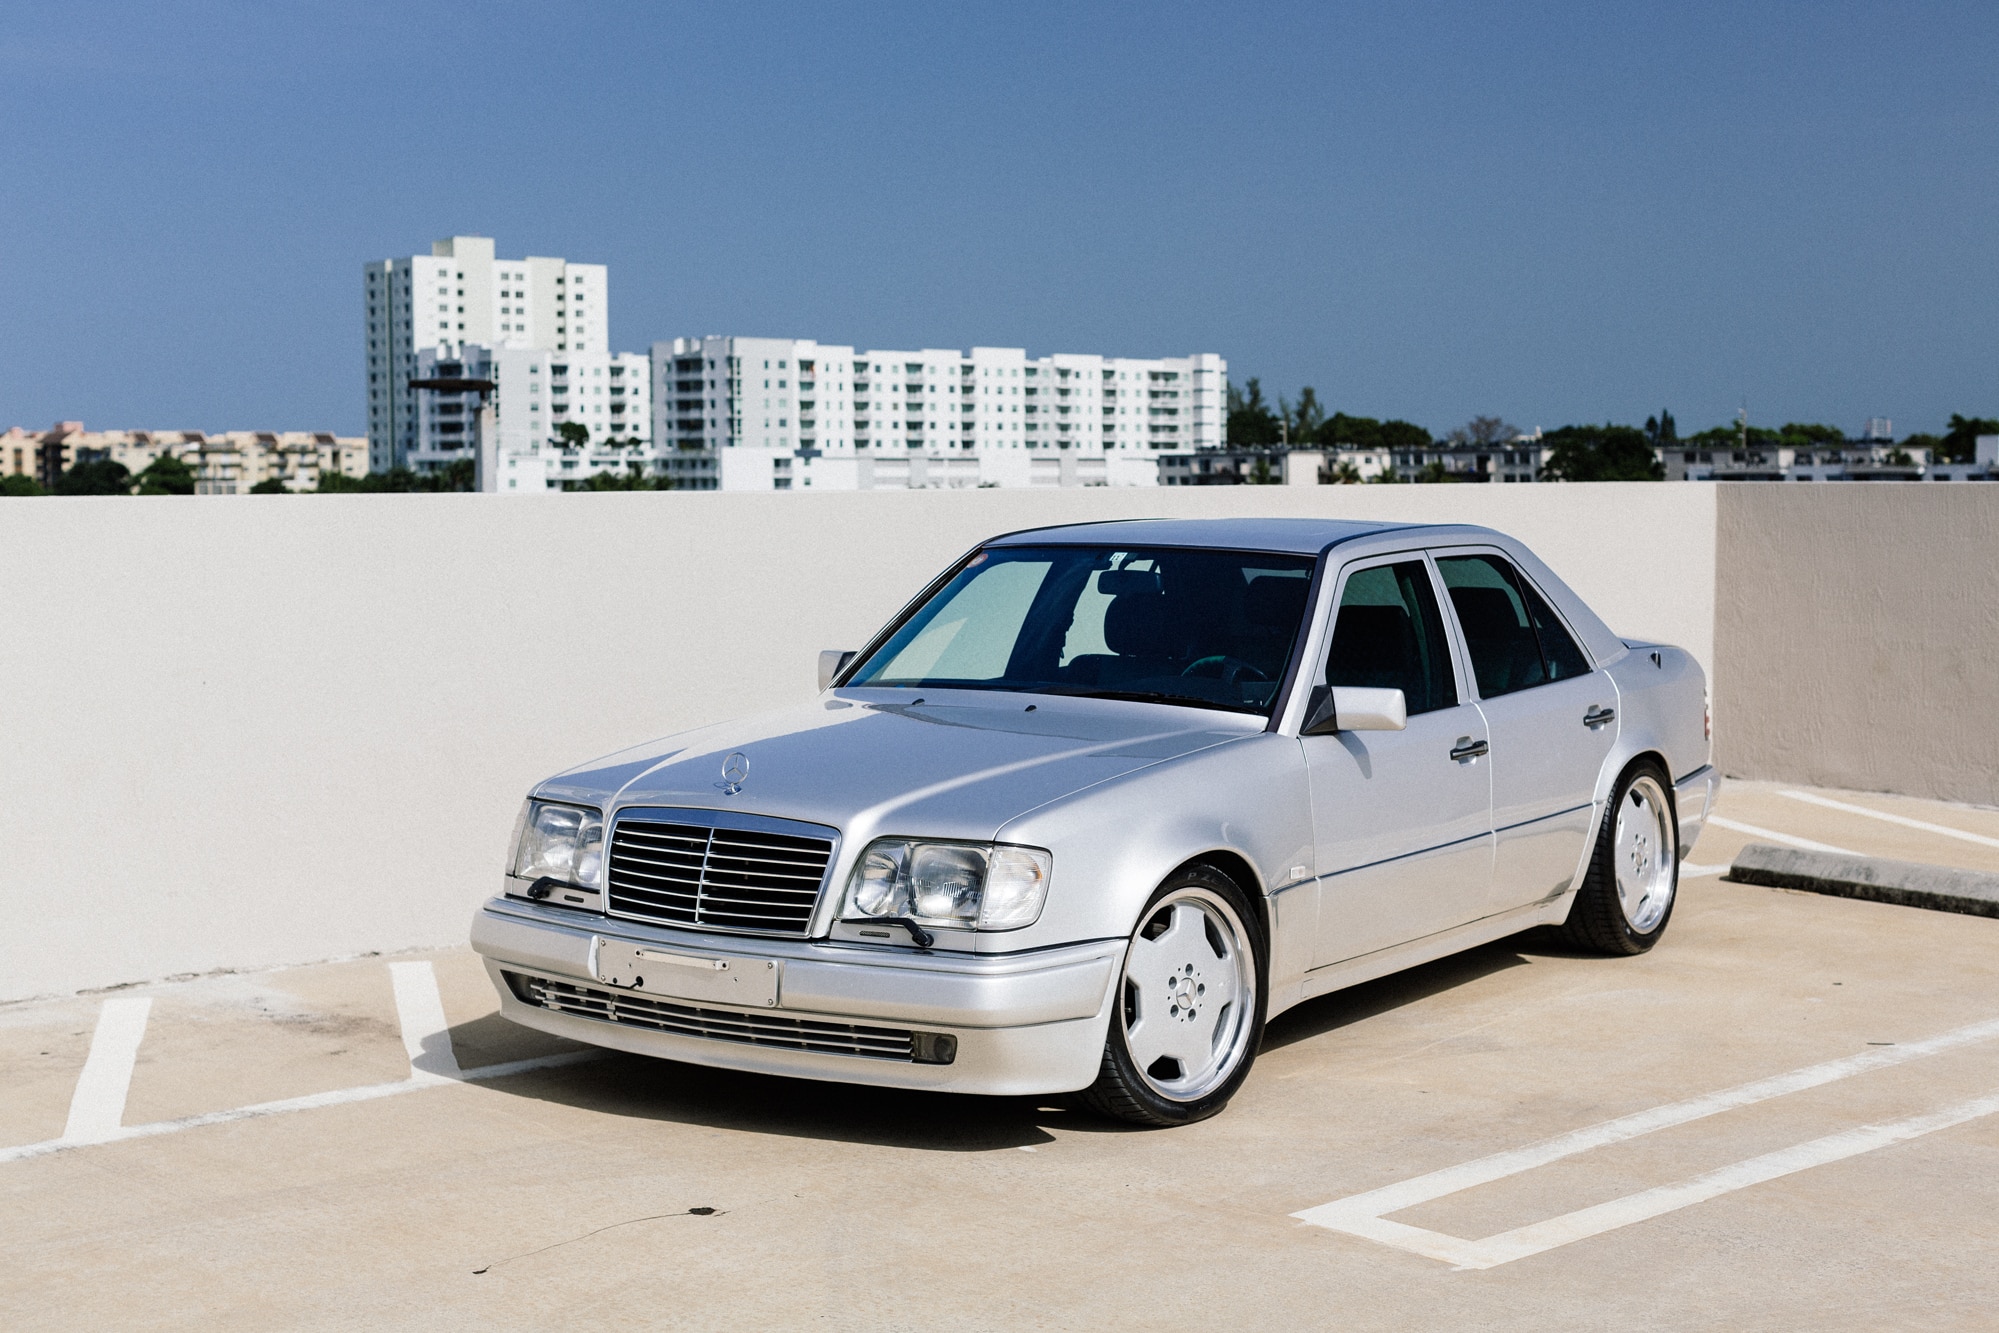 1994 Mercedes-Benz E500 Limited (W124) | Brilliant Silver/Black-Green | 1 of 951 | J’s Auto Exhaust | Service History | Amazing Condition | Extremely Rare